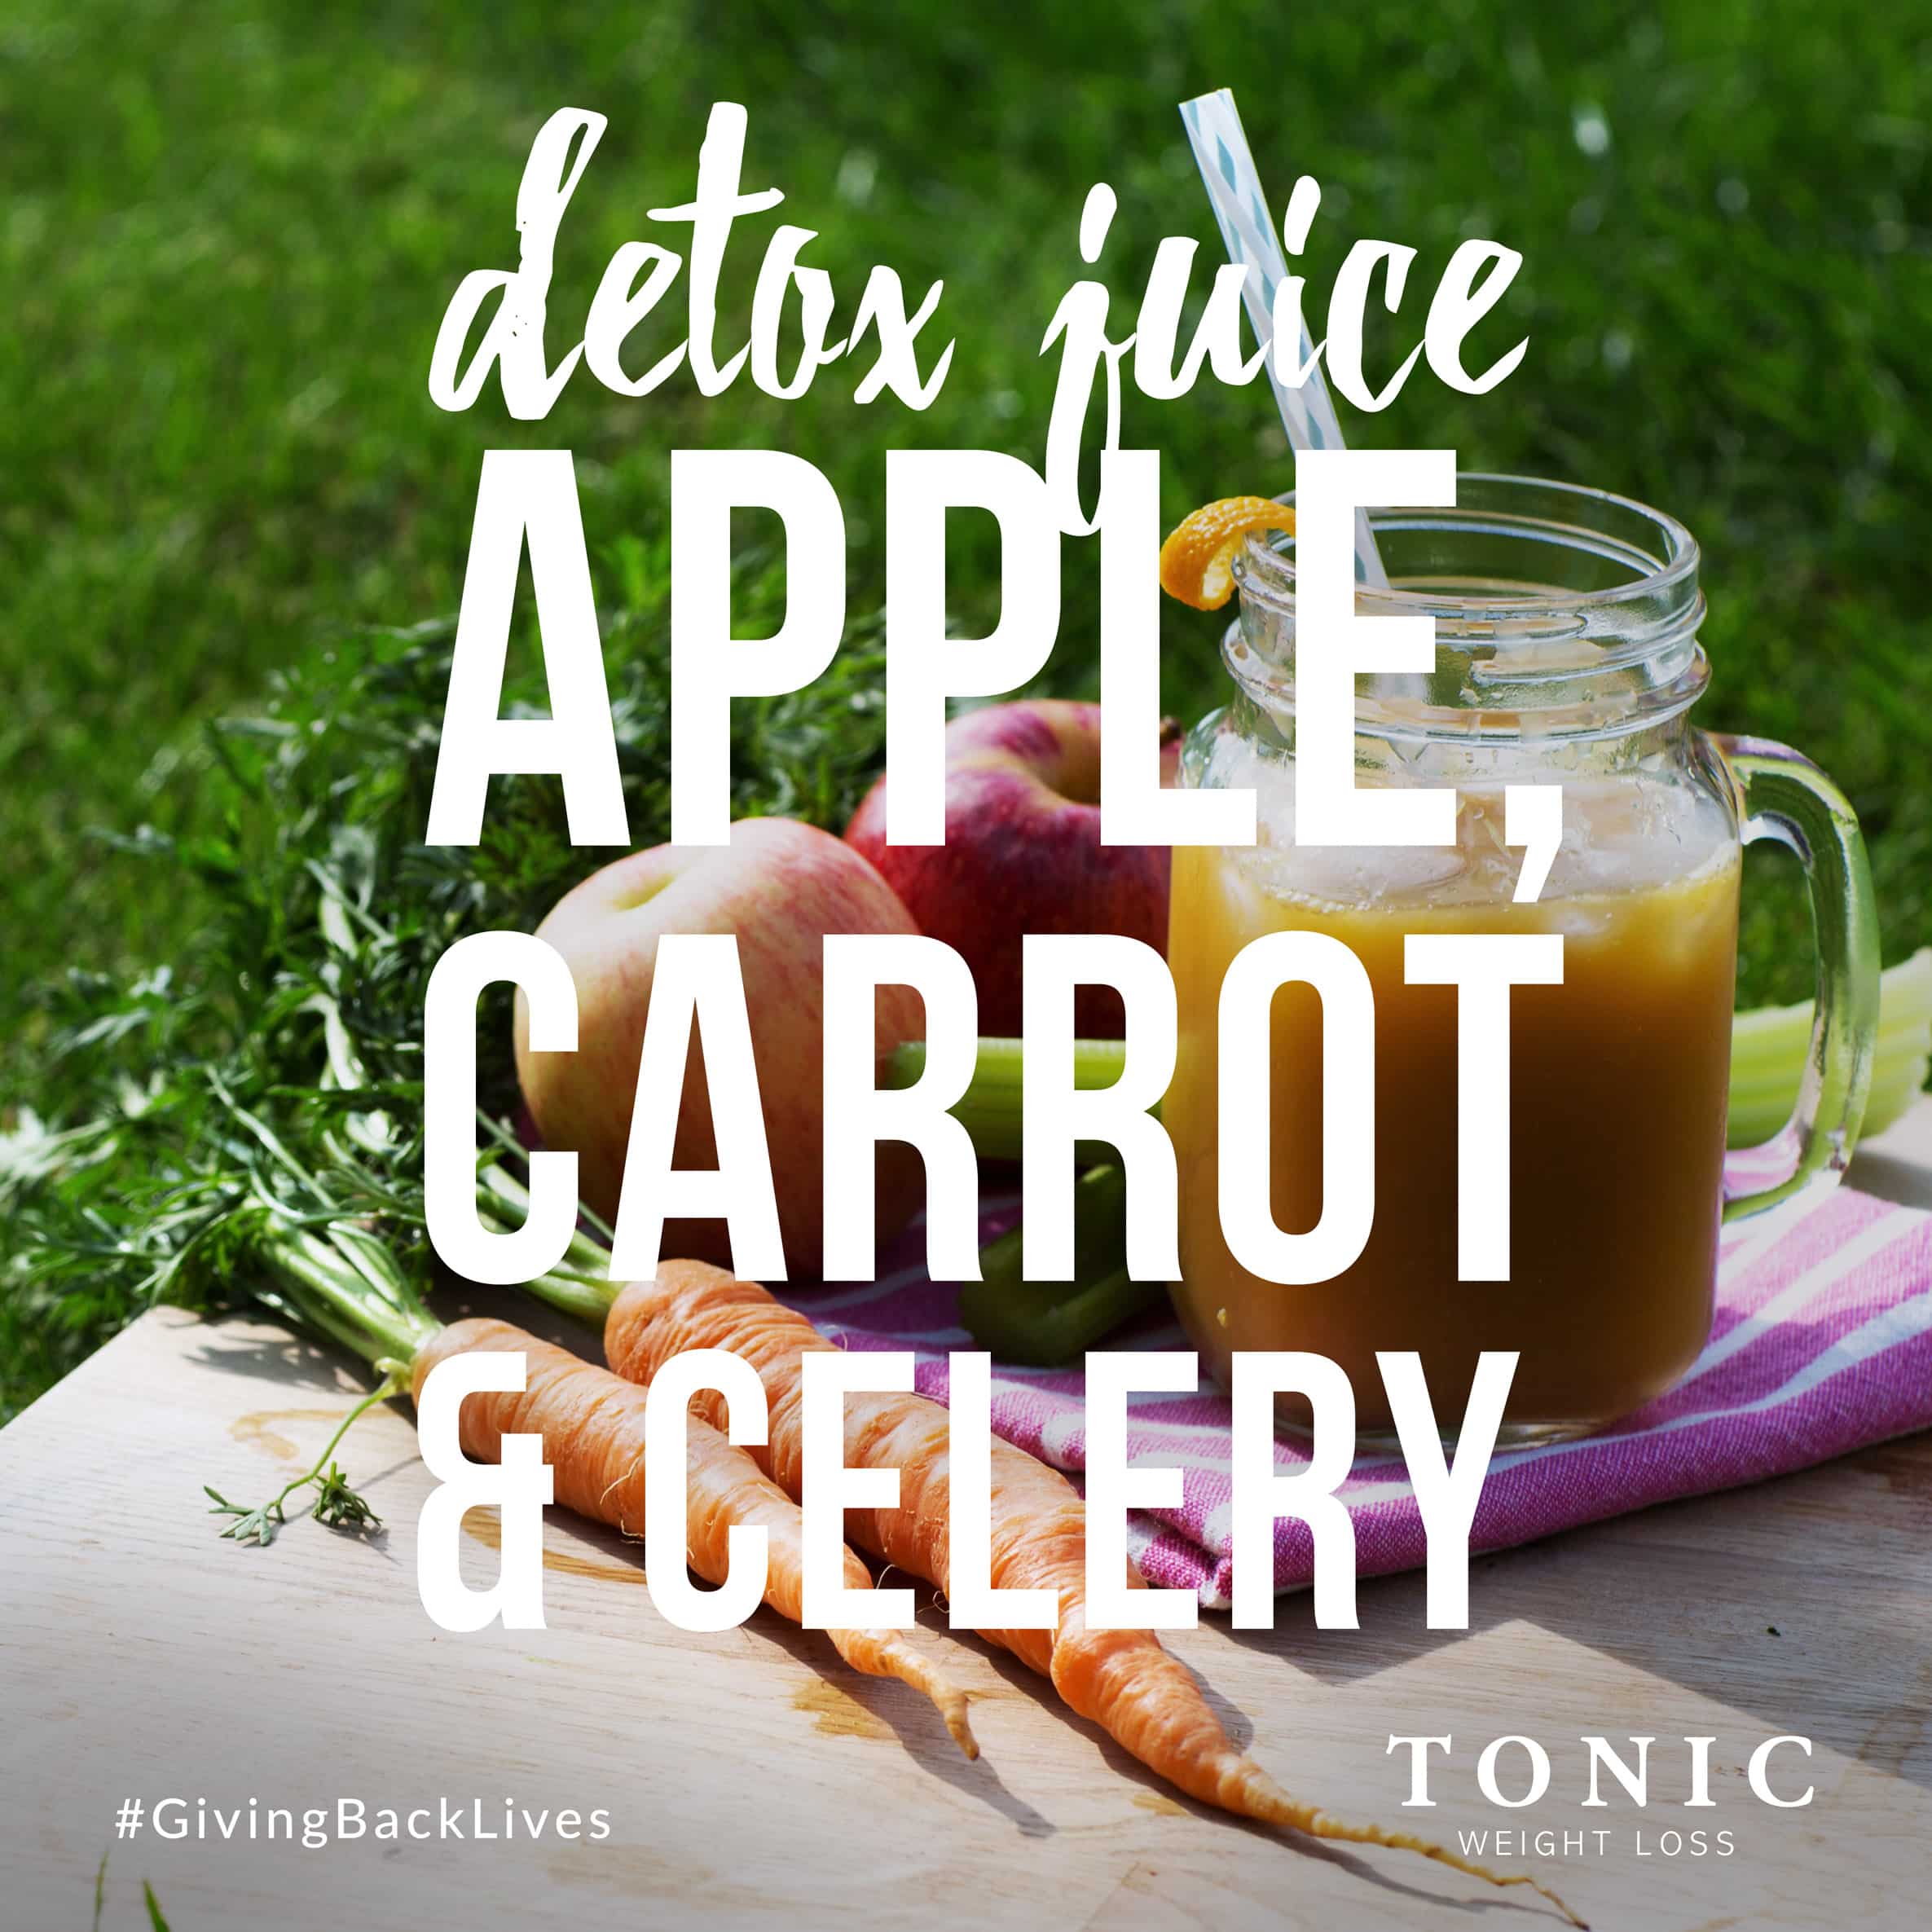 Detox-Juice-Apple-carrot-and-celery-healthy-nutrition